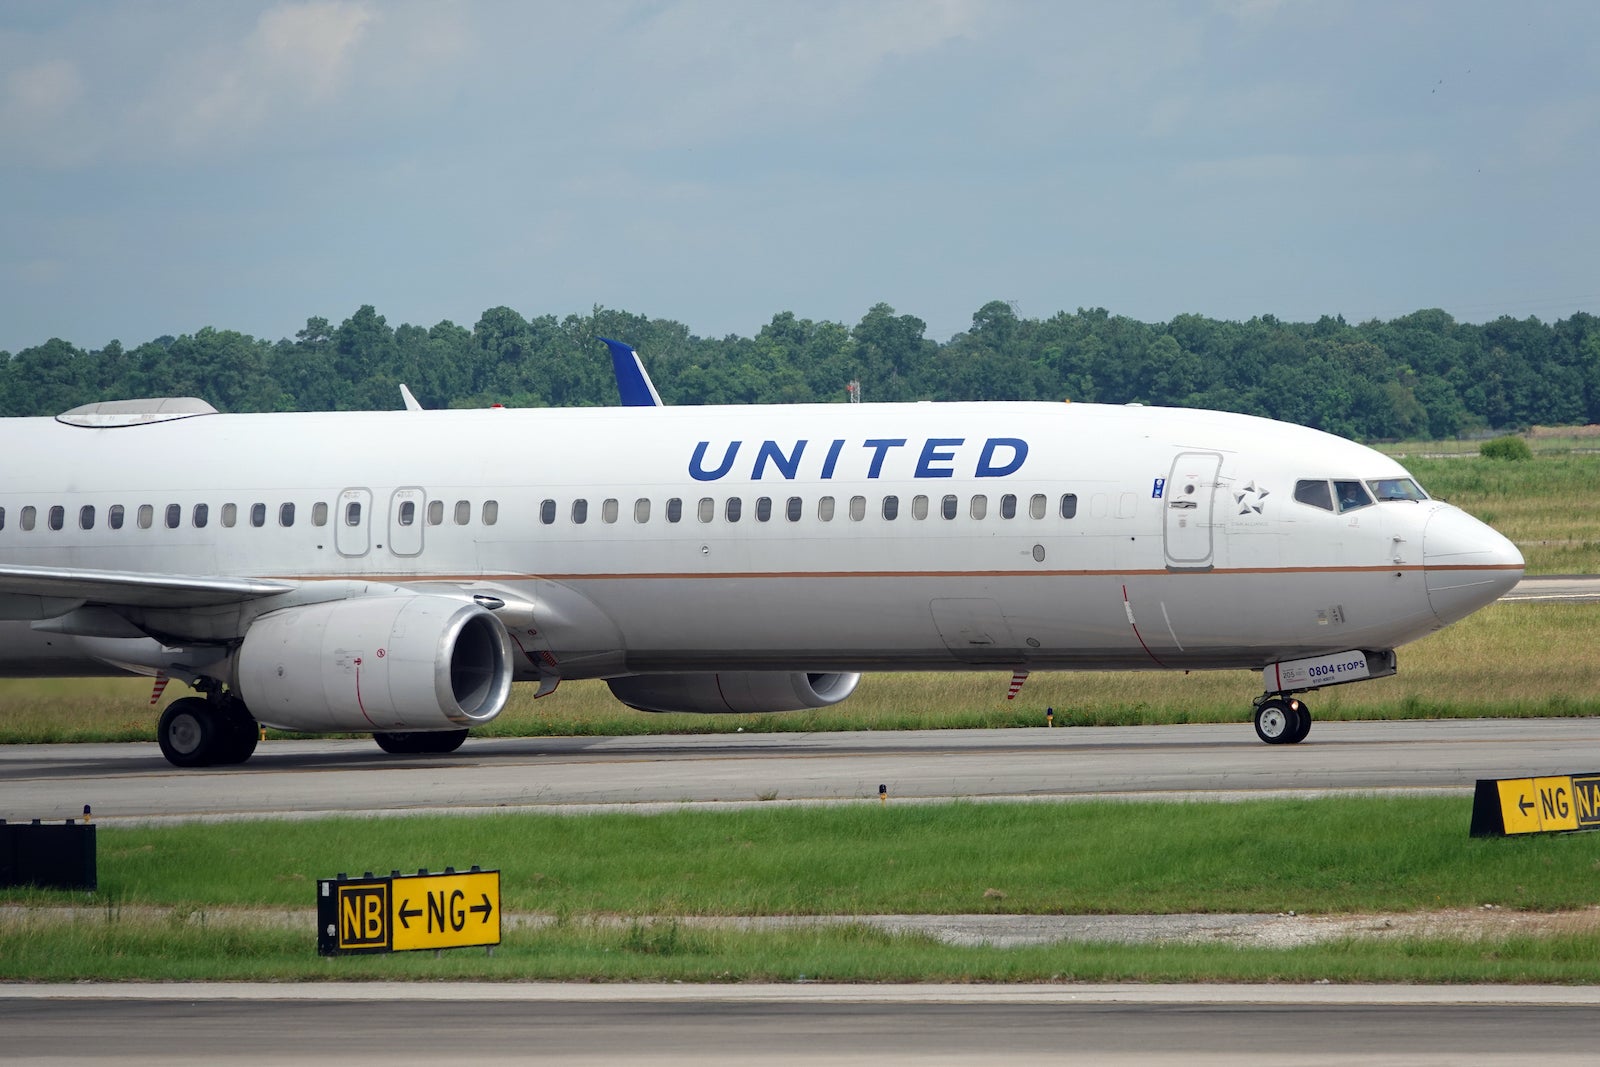 United just got fined nearly $2 million for 25 long tarmac delays